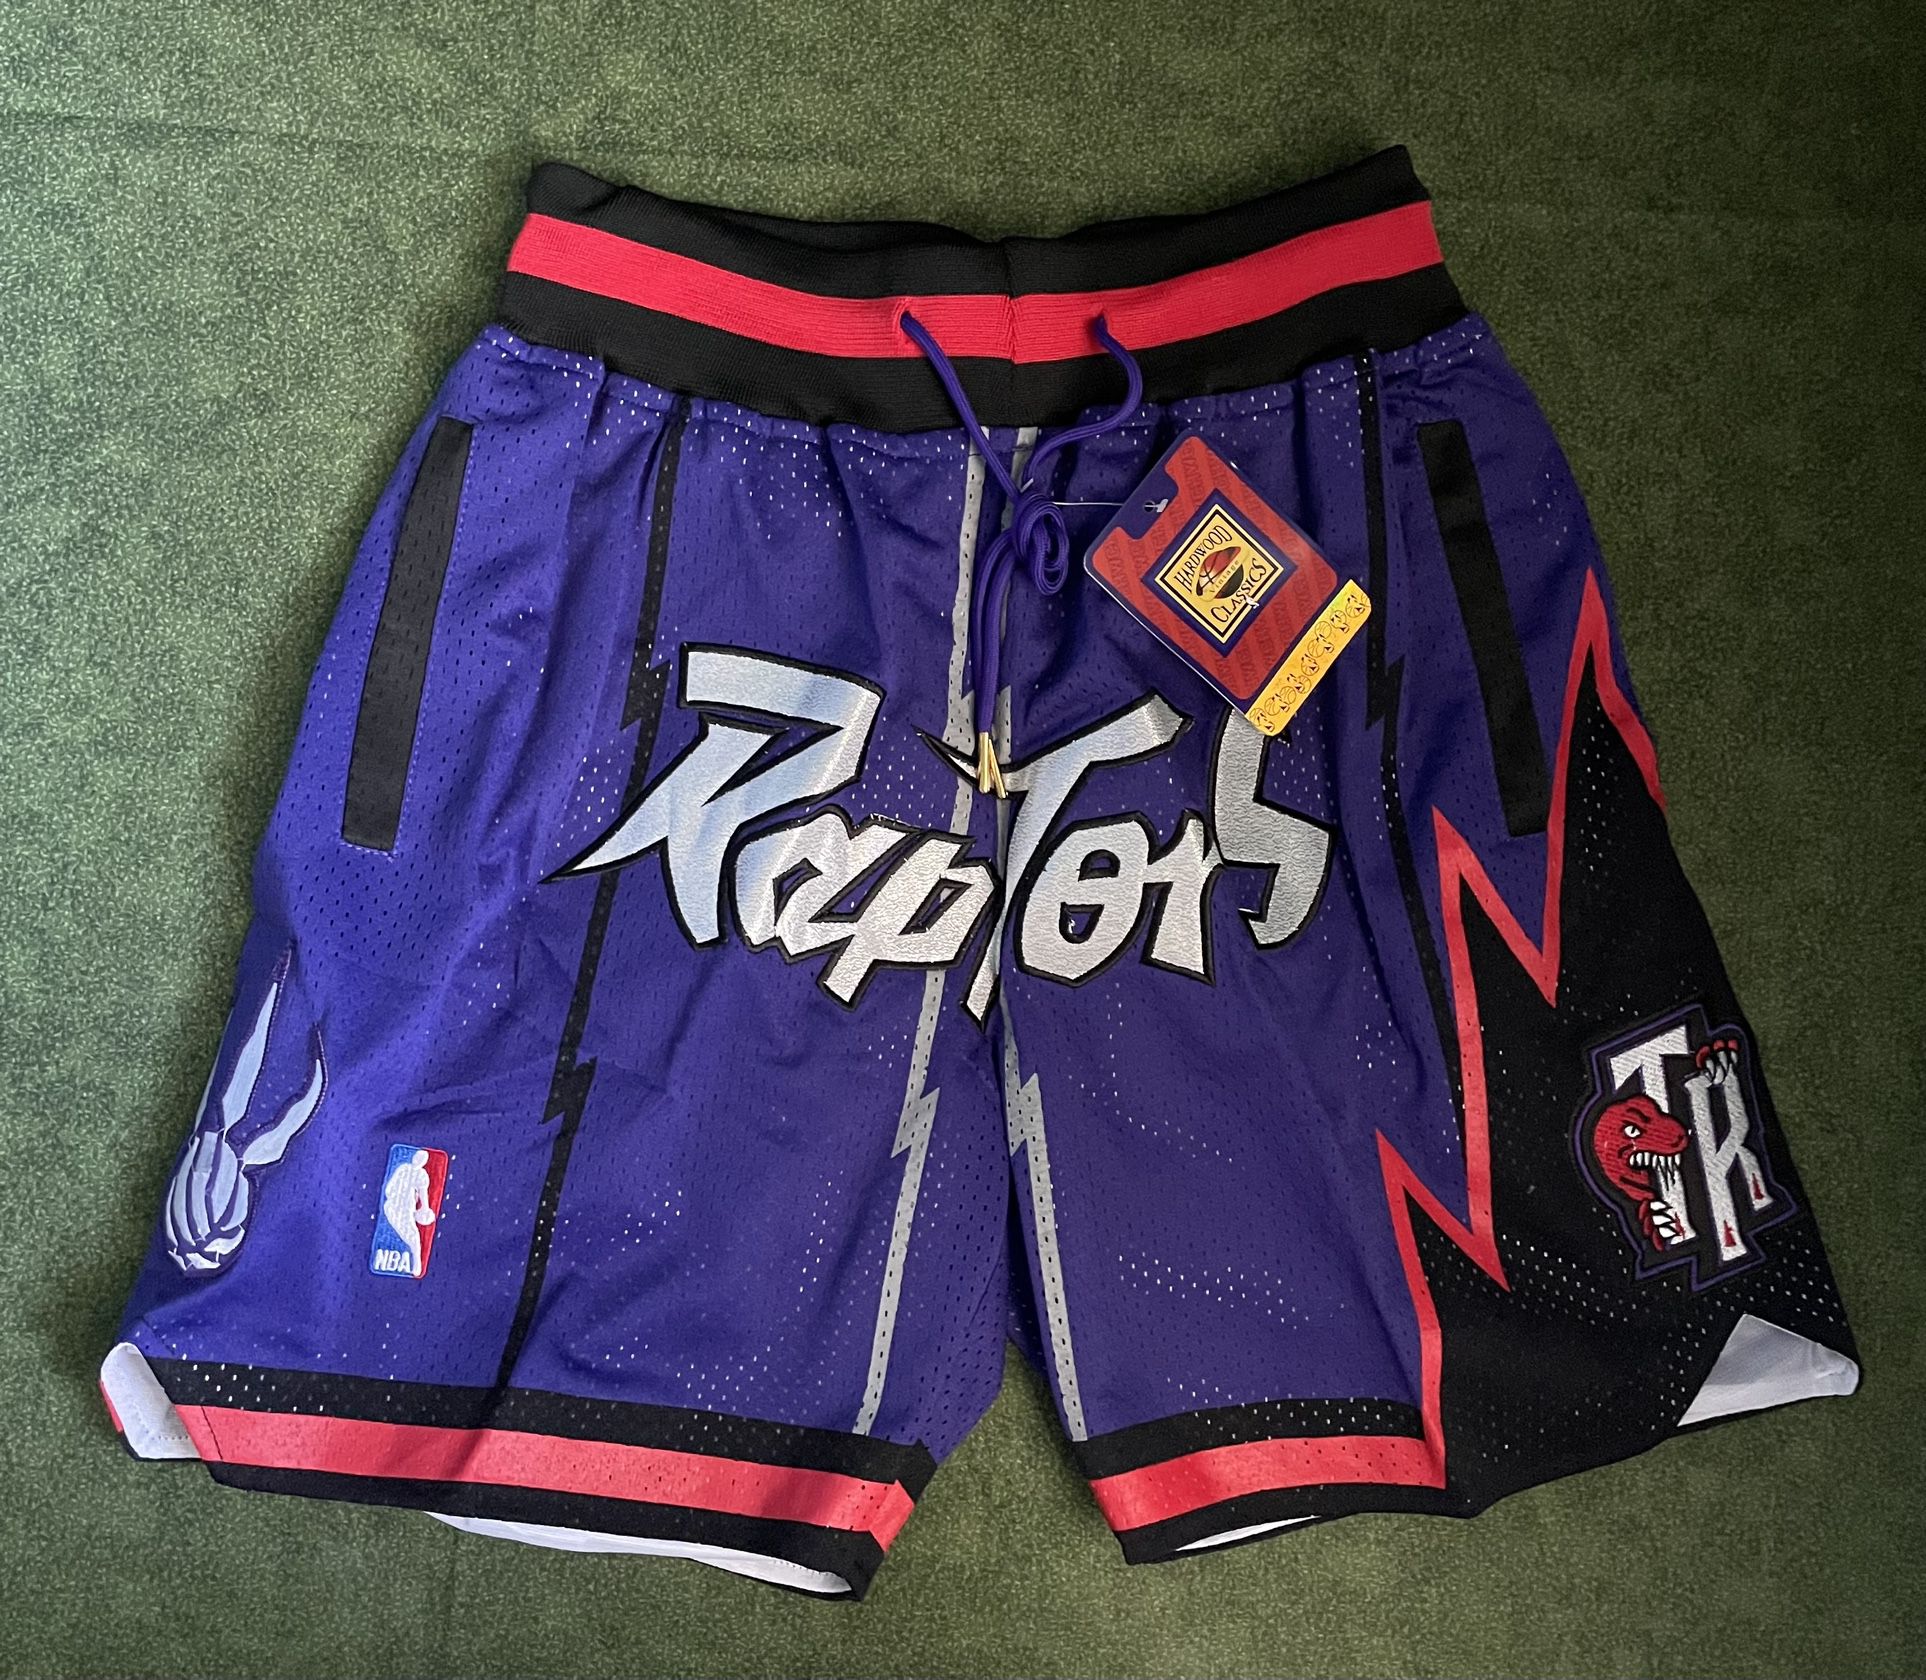 TORONTO RAPTORS JUST DON NBA BASKETBALL SHORTS BRAND NEW WITH TAGS SIZES SMALL, MEDIUM AND LARGE AVAILABLE